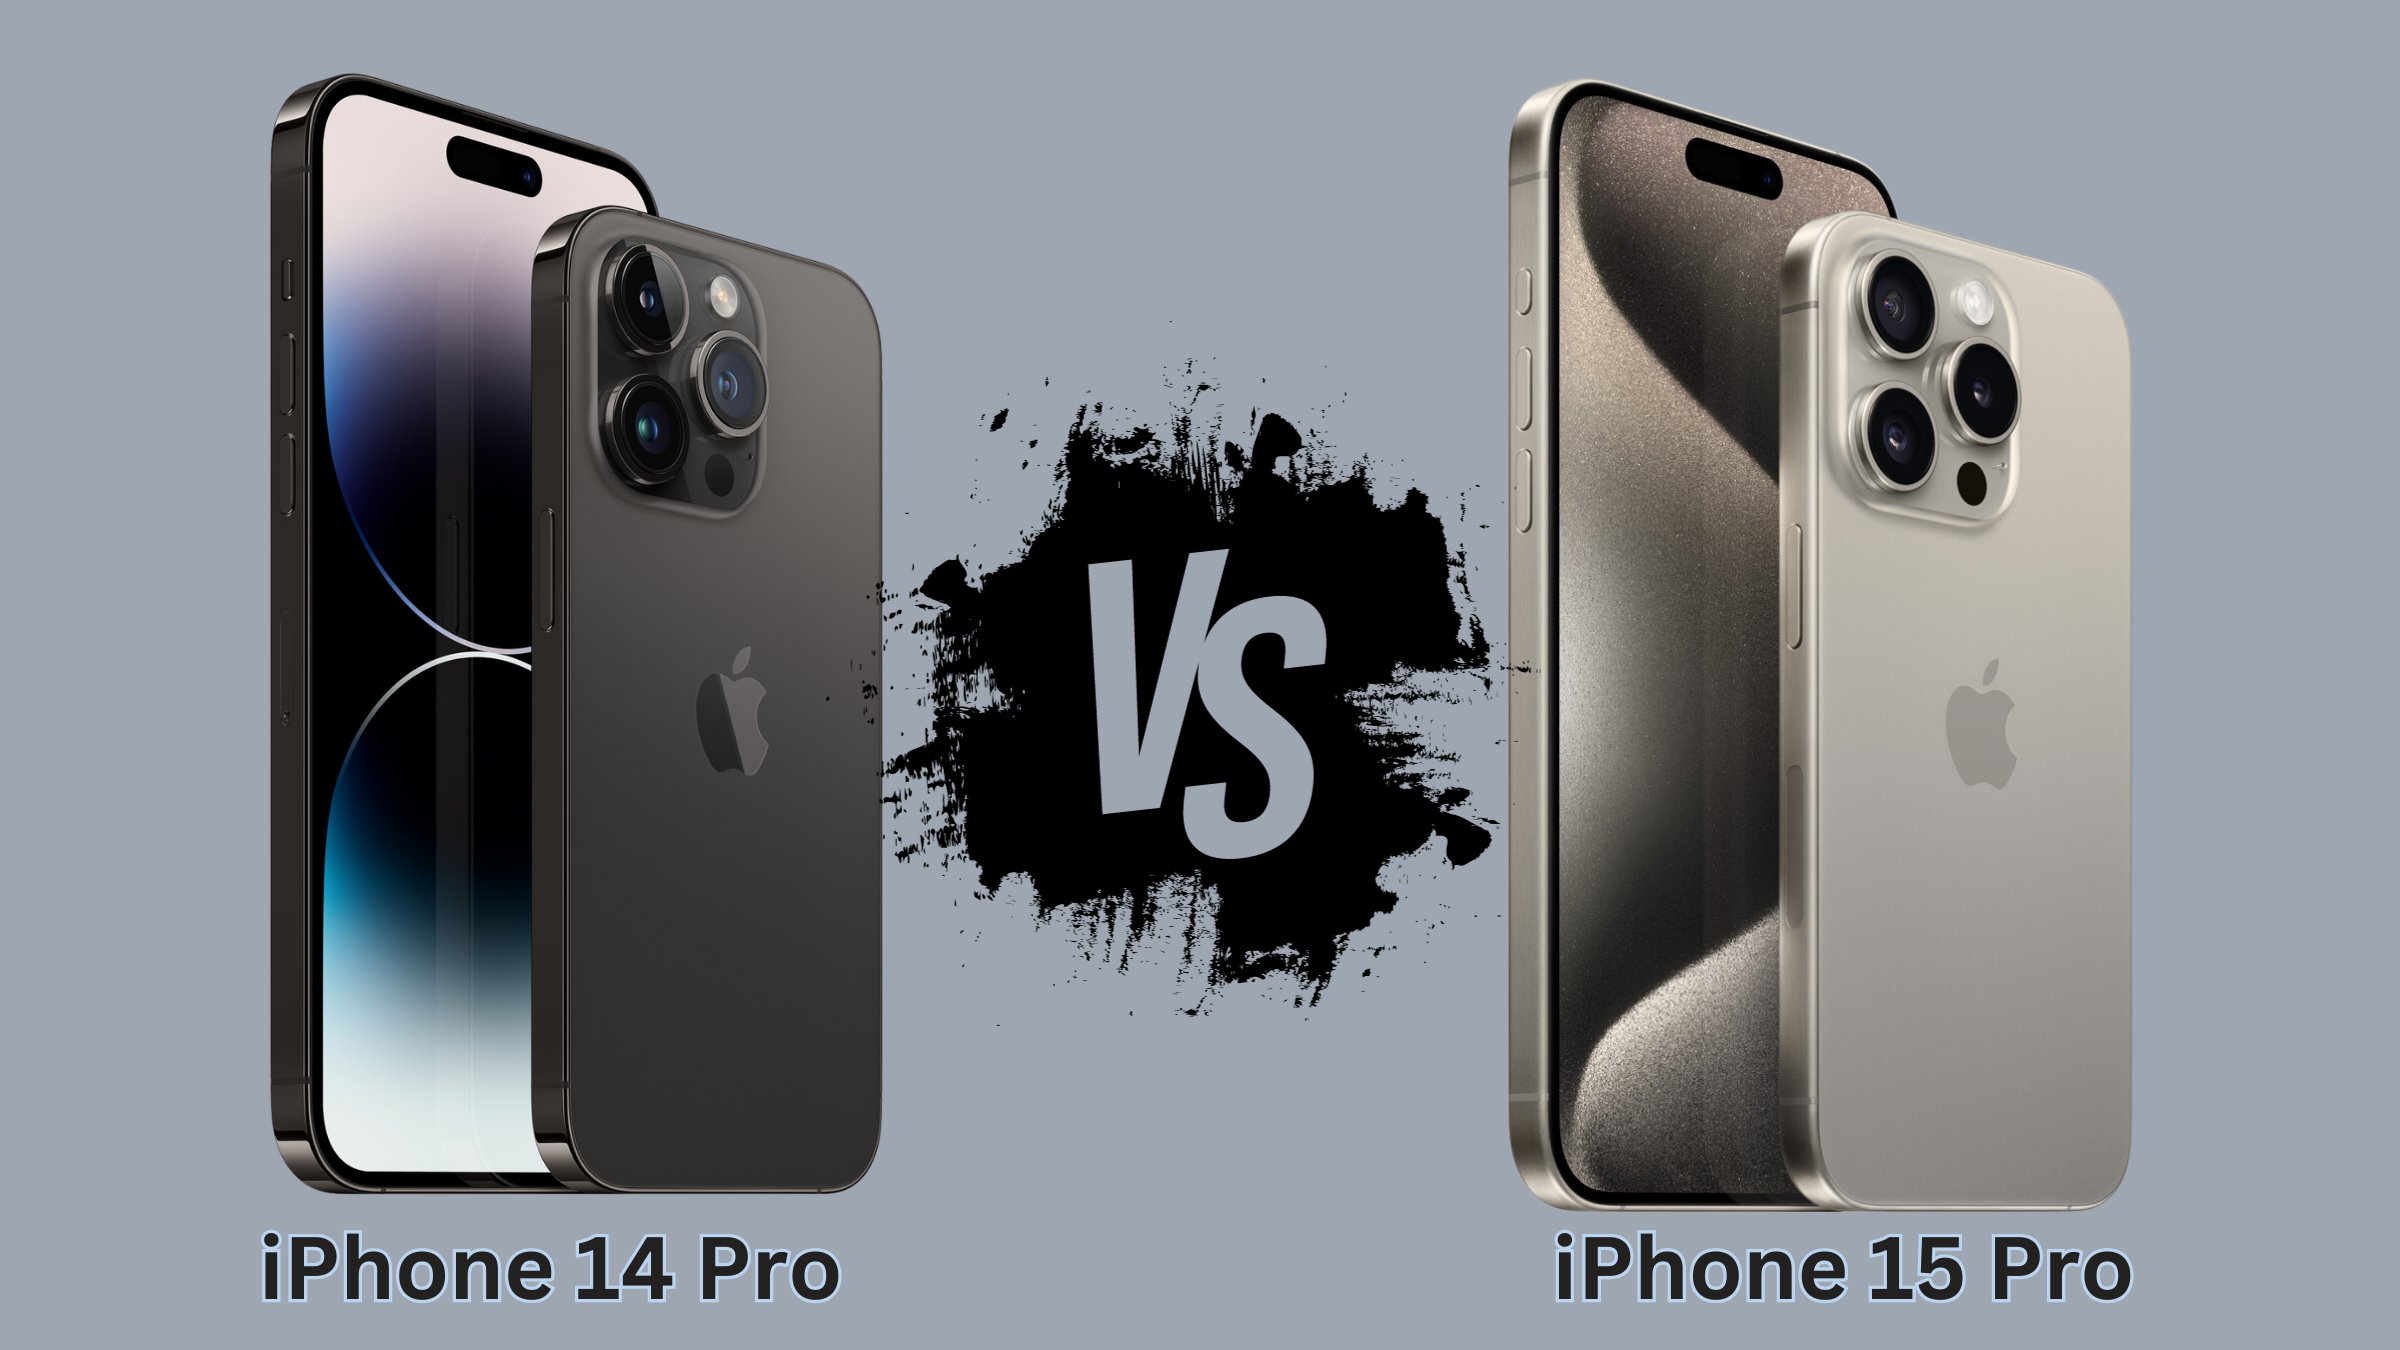 iPhone 15 vs iPhone 14: What will extra Rs 10,000 get you, and is